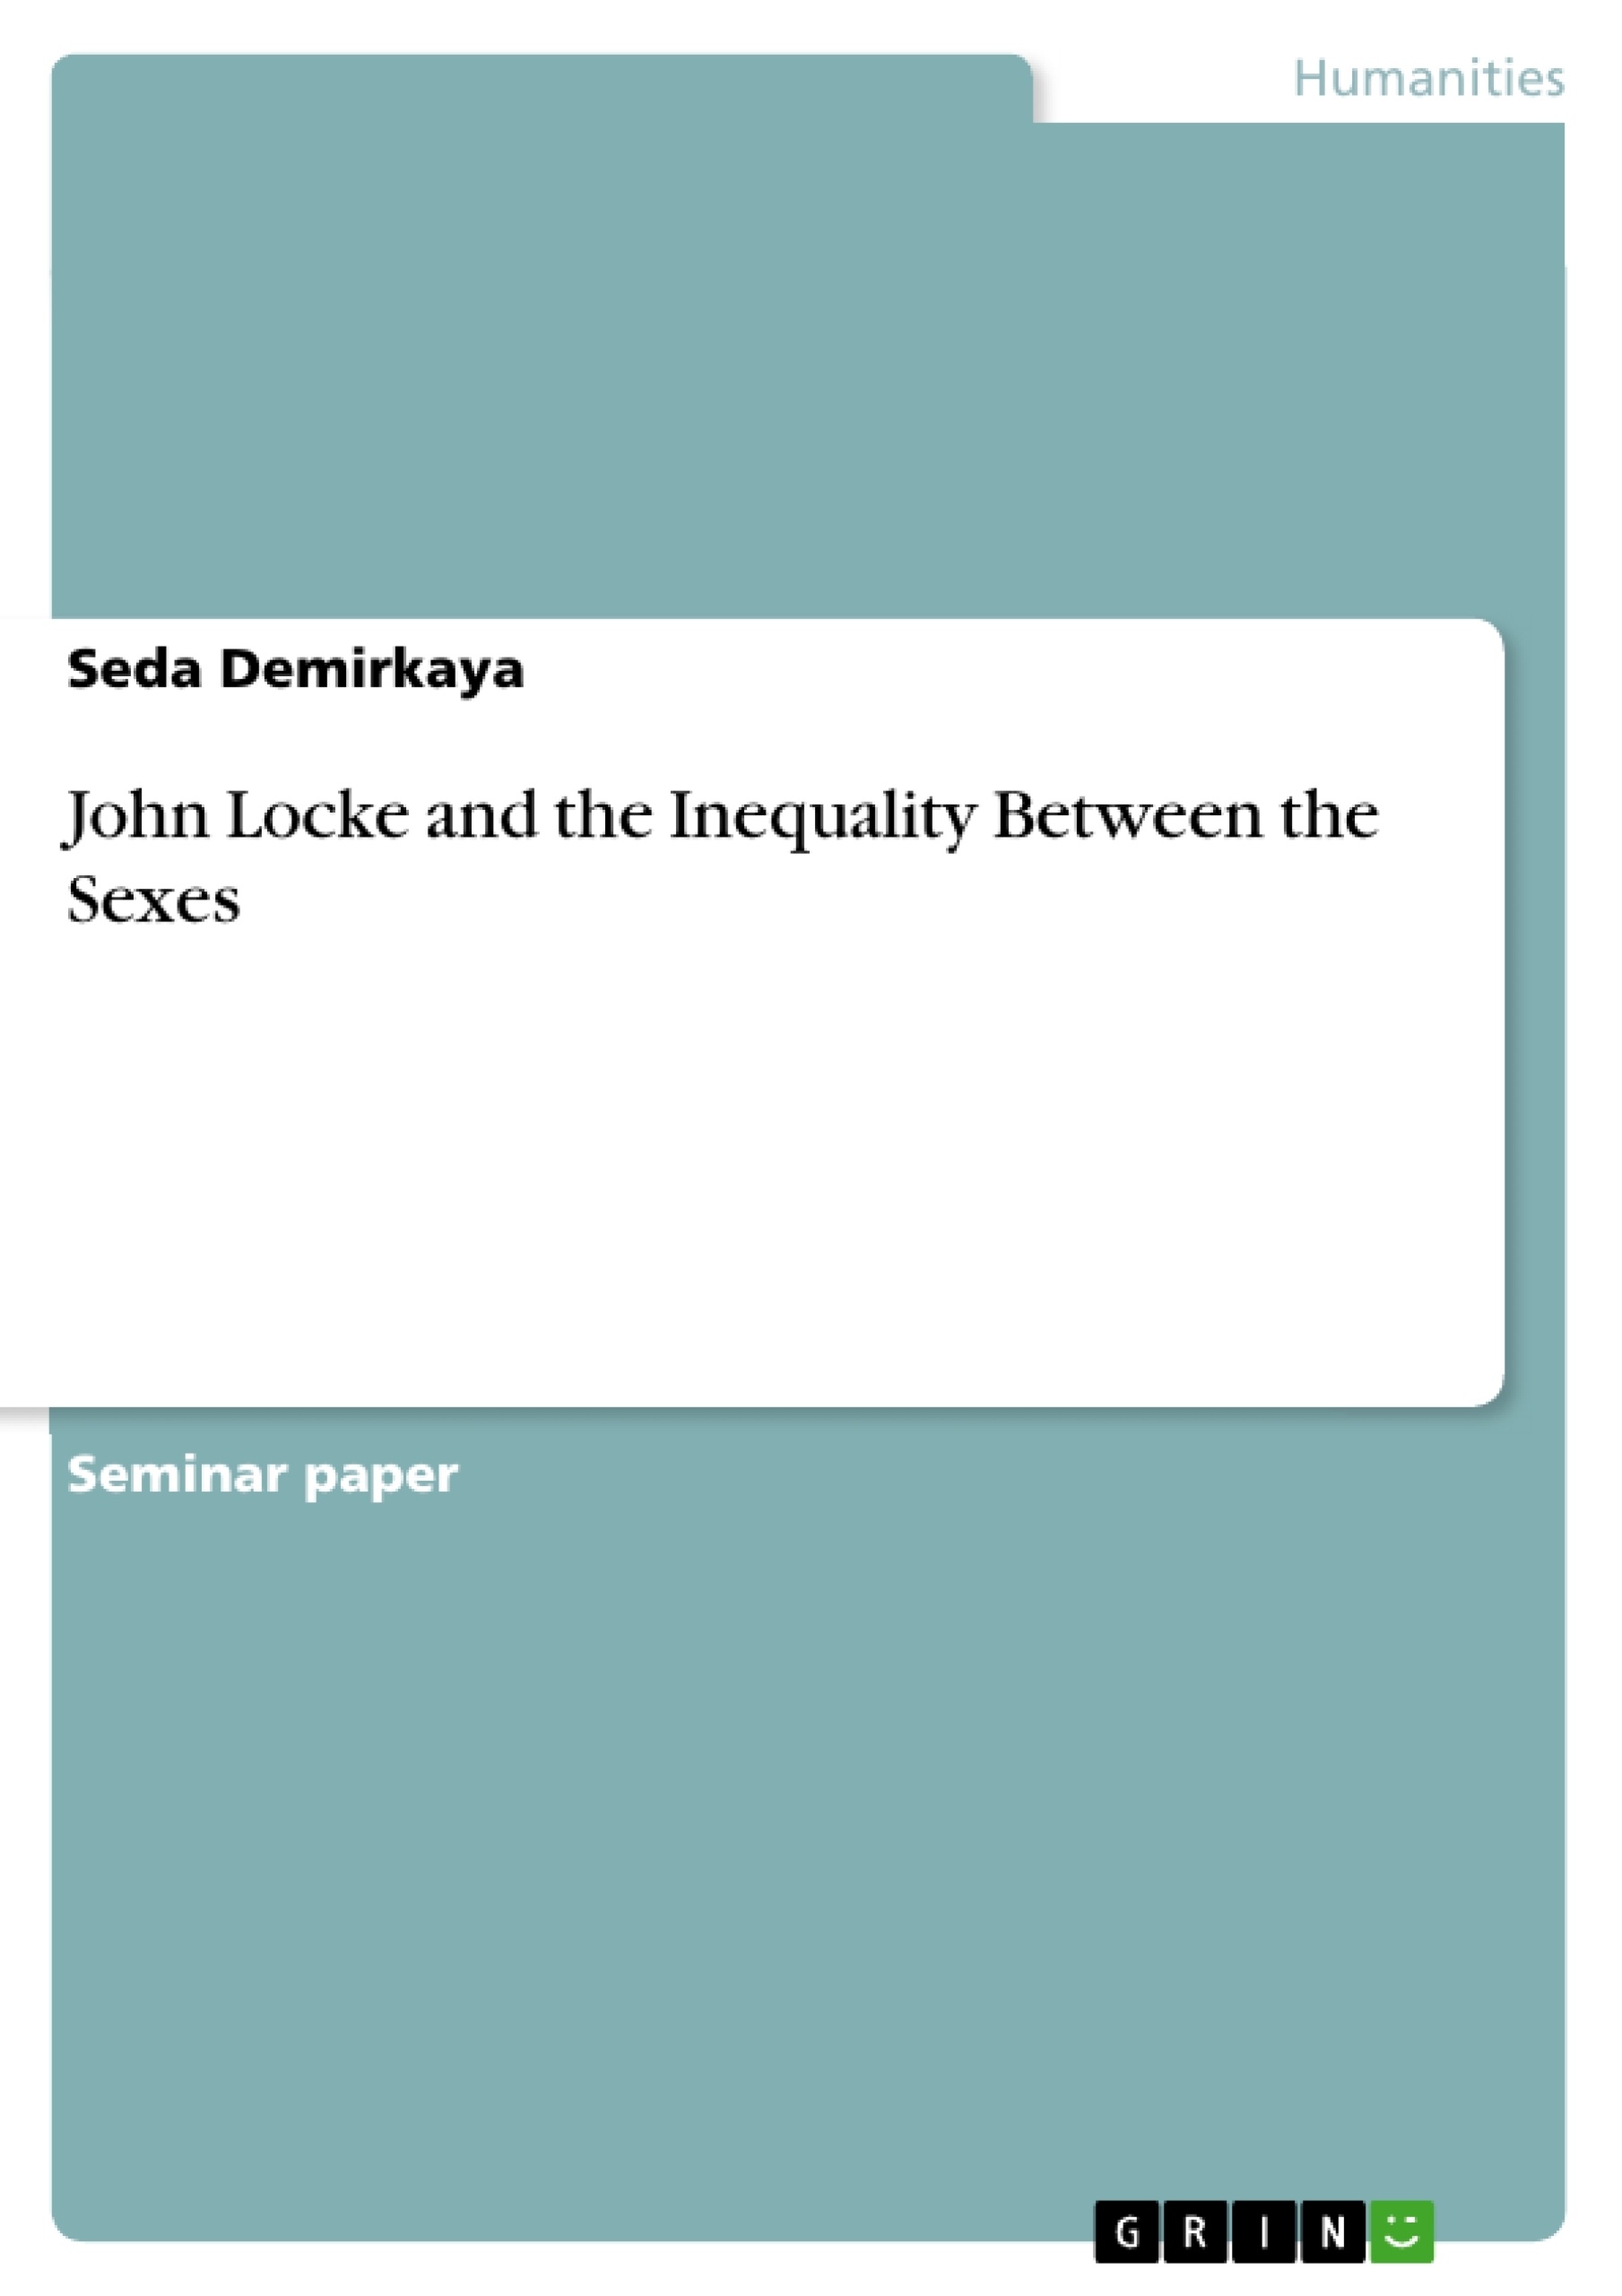 Title: John Locke and the Inequality Between the Sexes